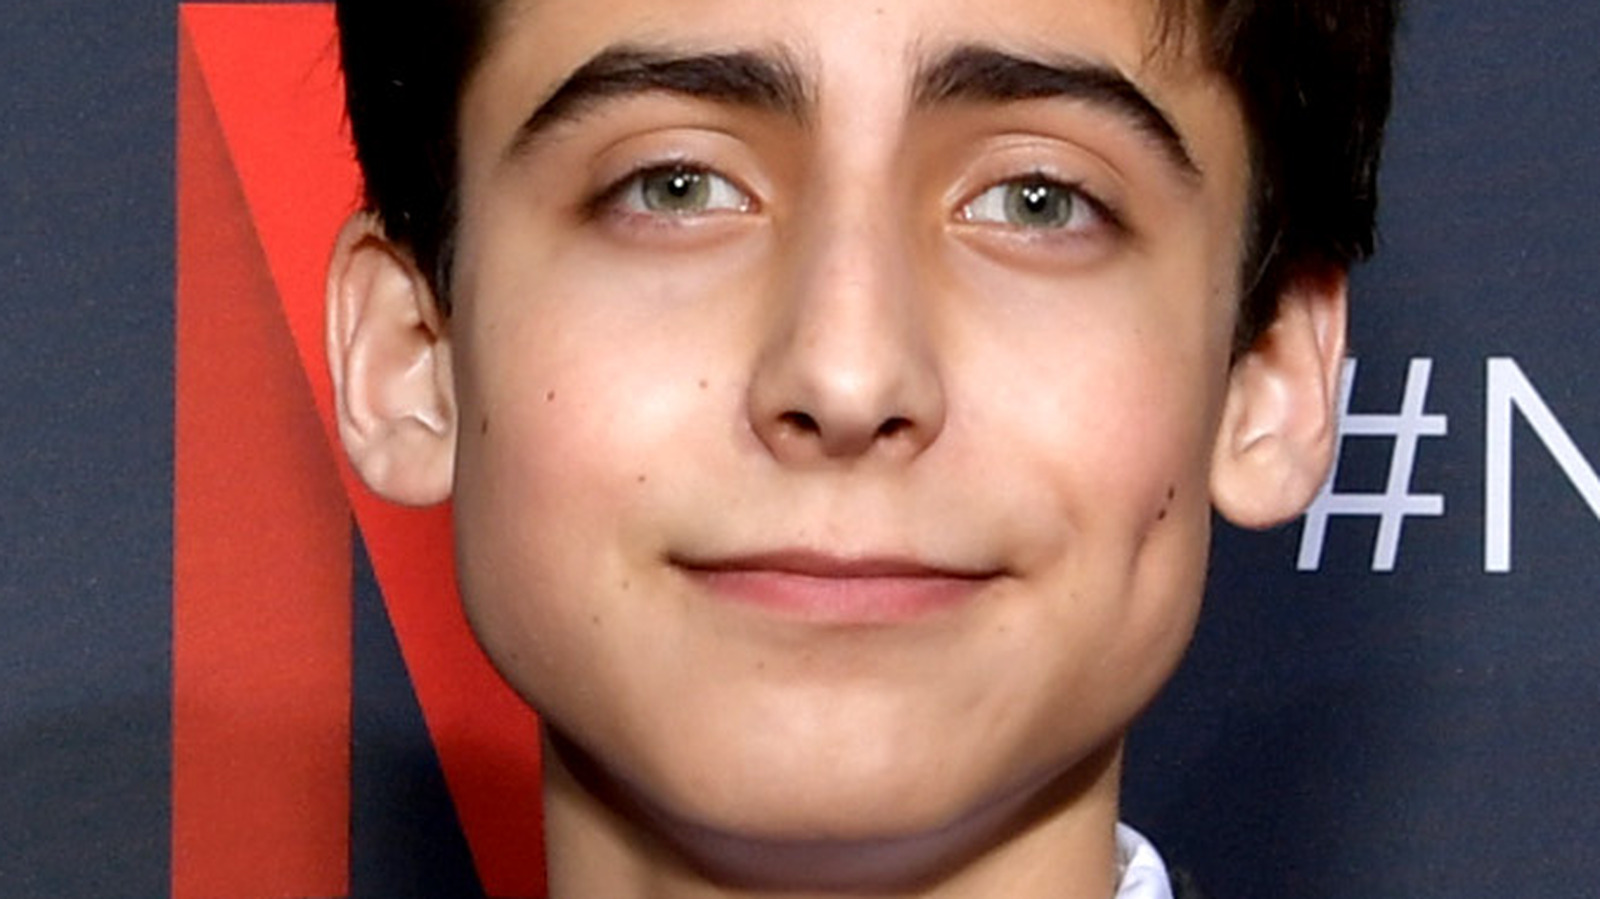 What You Don't Know About Aidan Gallagher